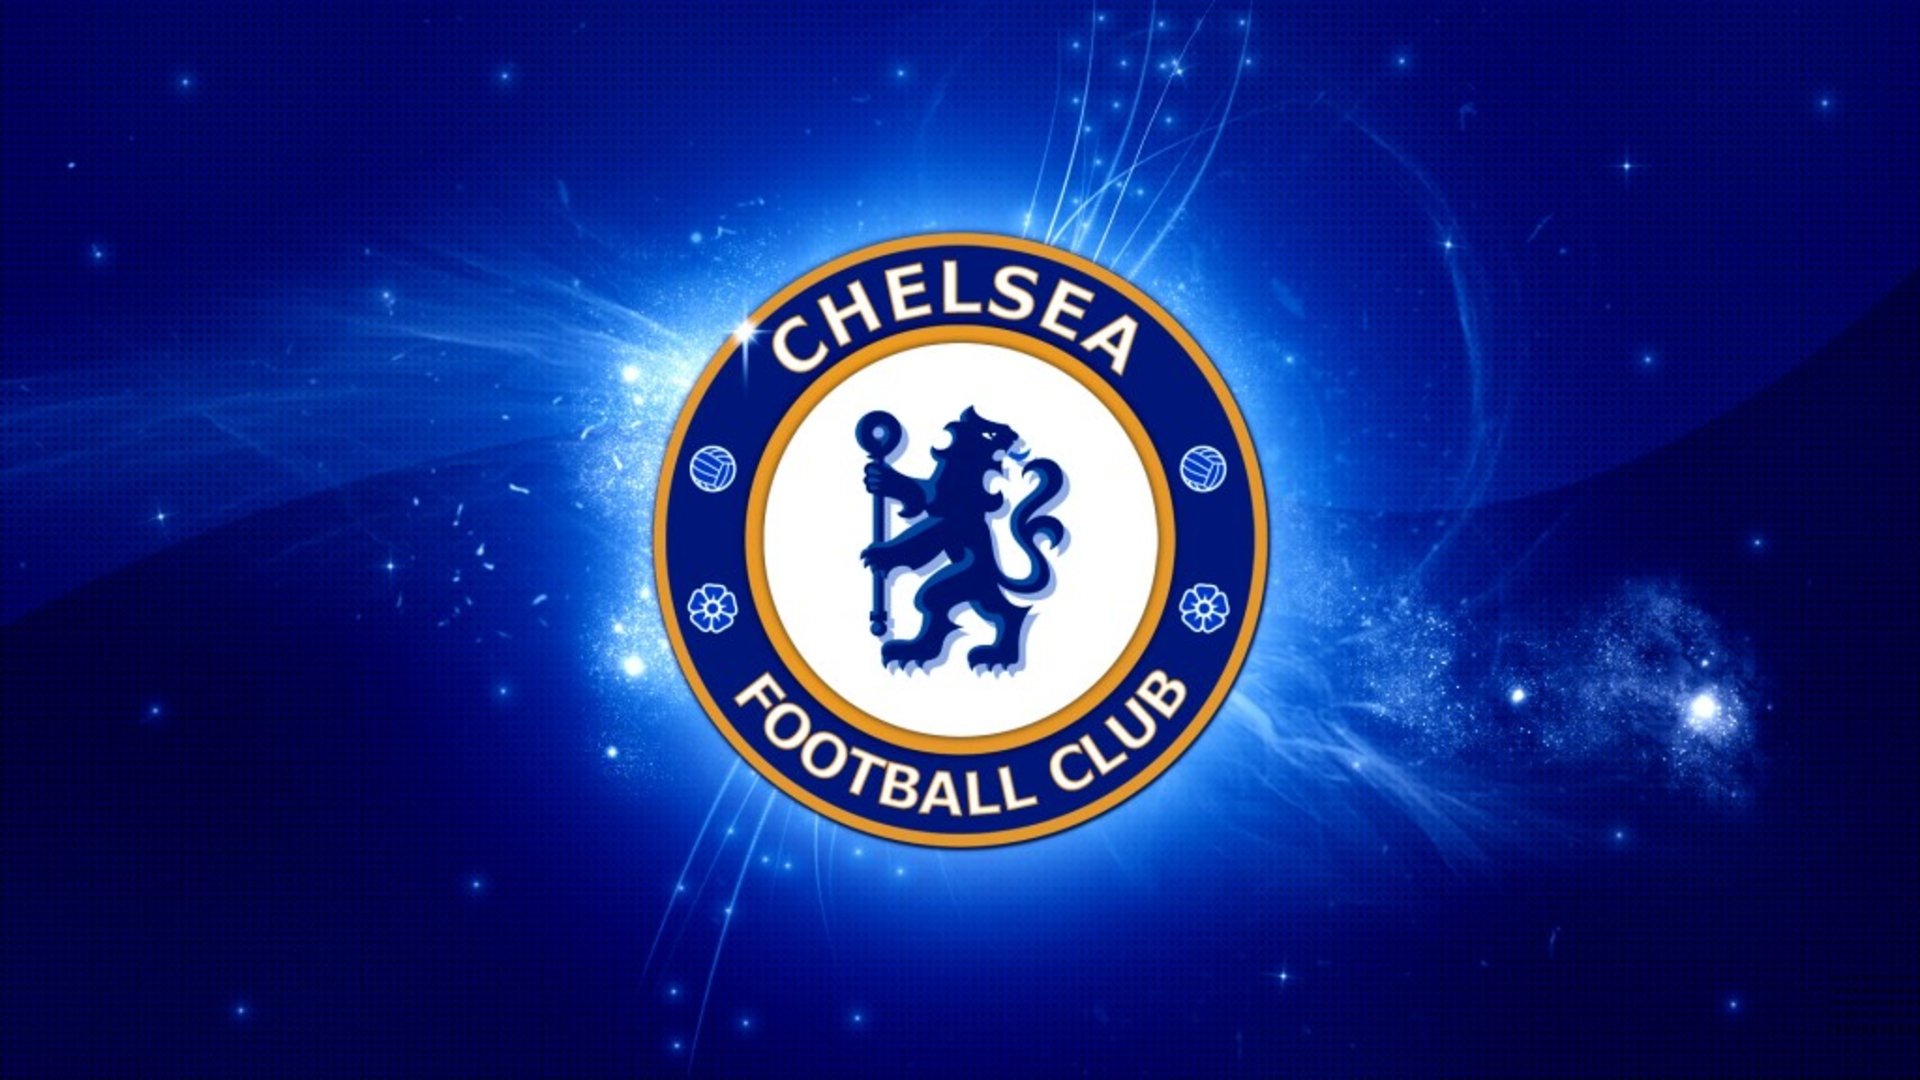 Free download Football club Chelsea logo wallpaper and image wallpaper [1920x1080] for your Desktop, Mobile & Tablet. Explore Football Logo Wallpaper. Alabama Football Logo Wallpaper, Ohio State Football Logo